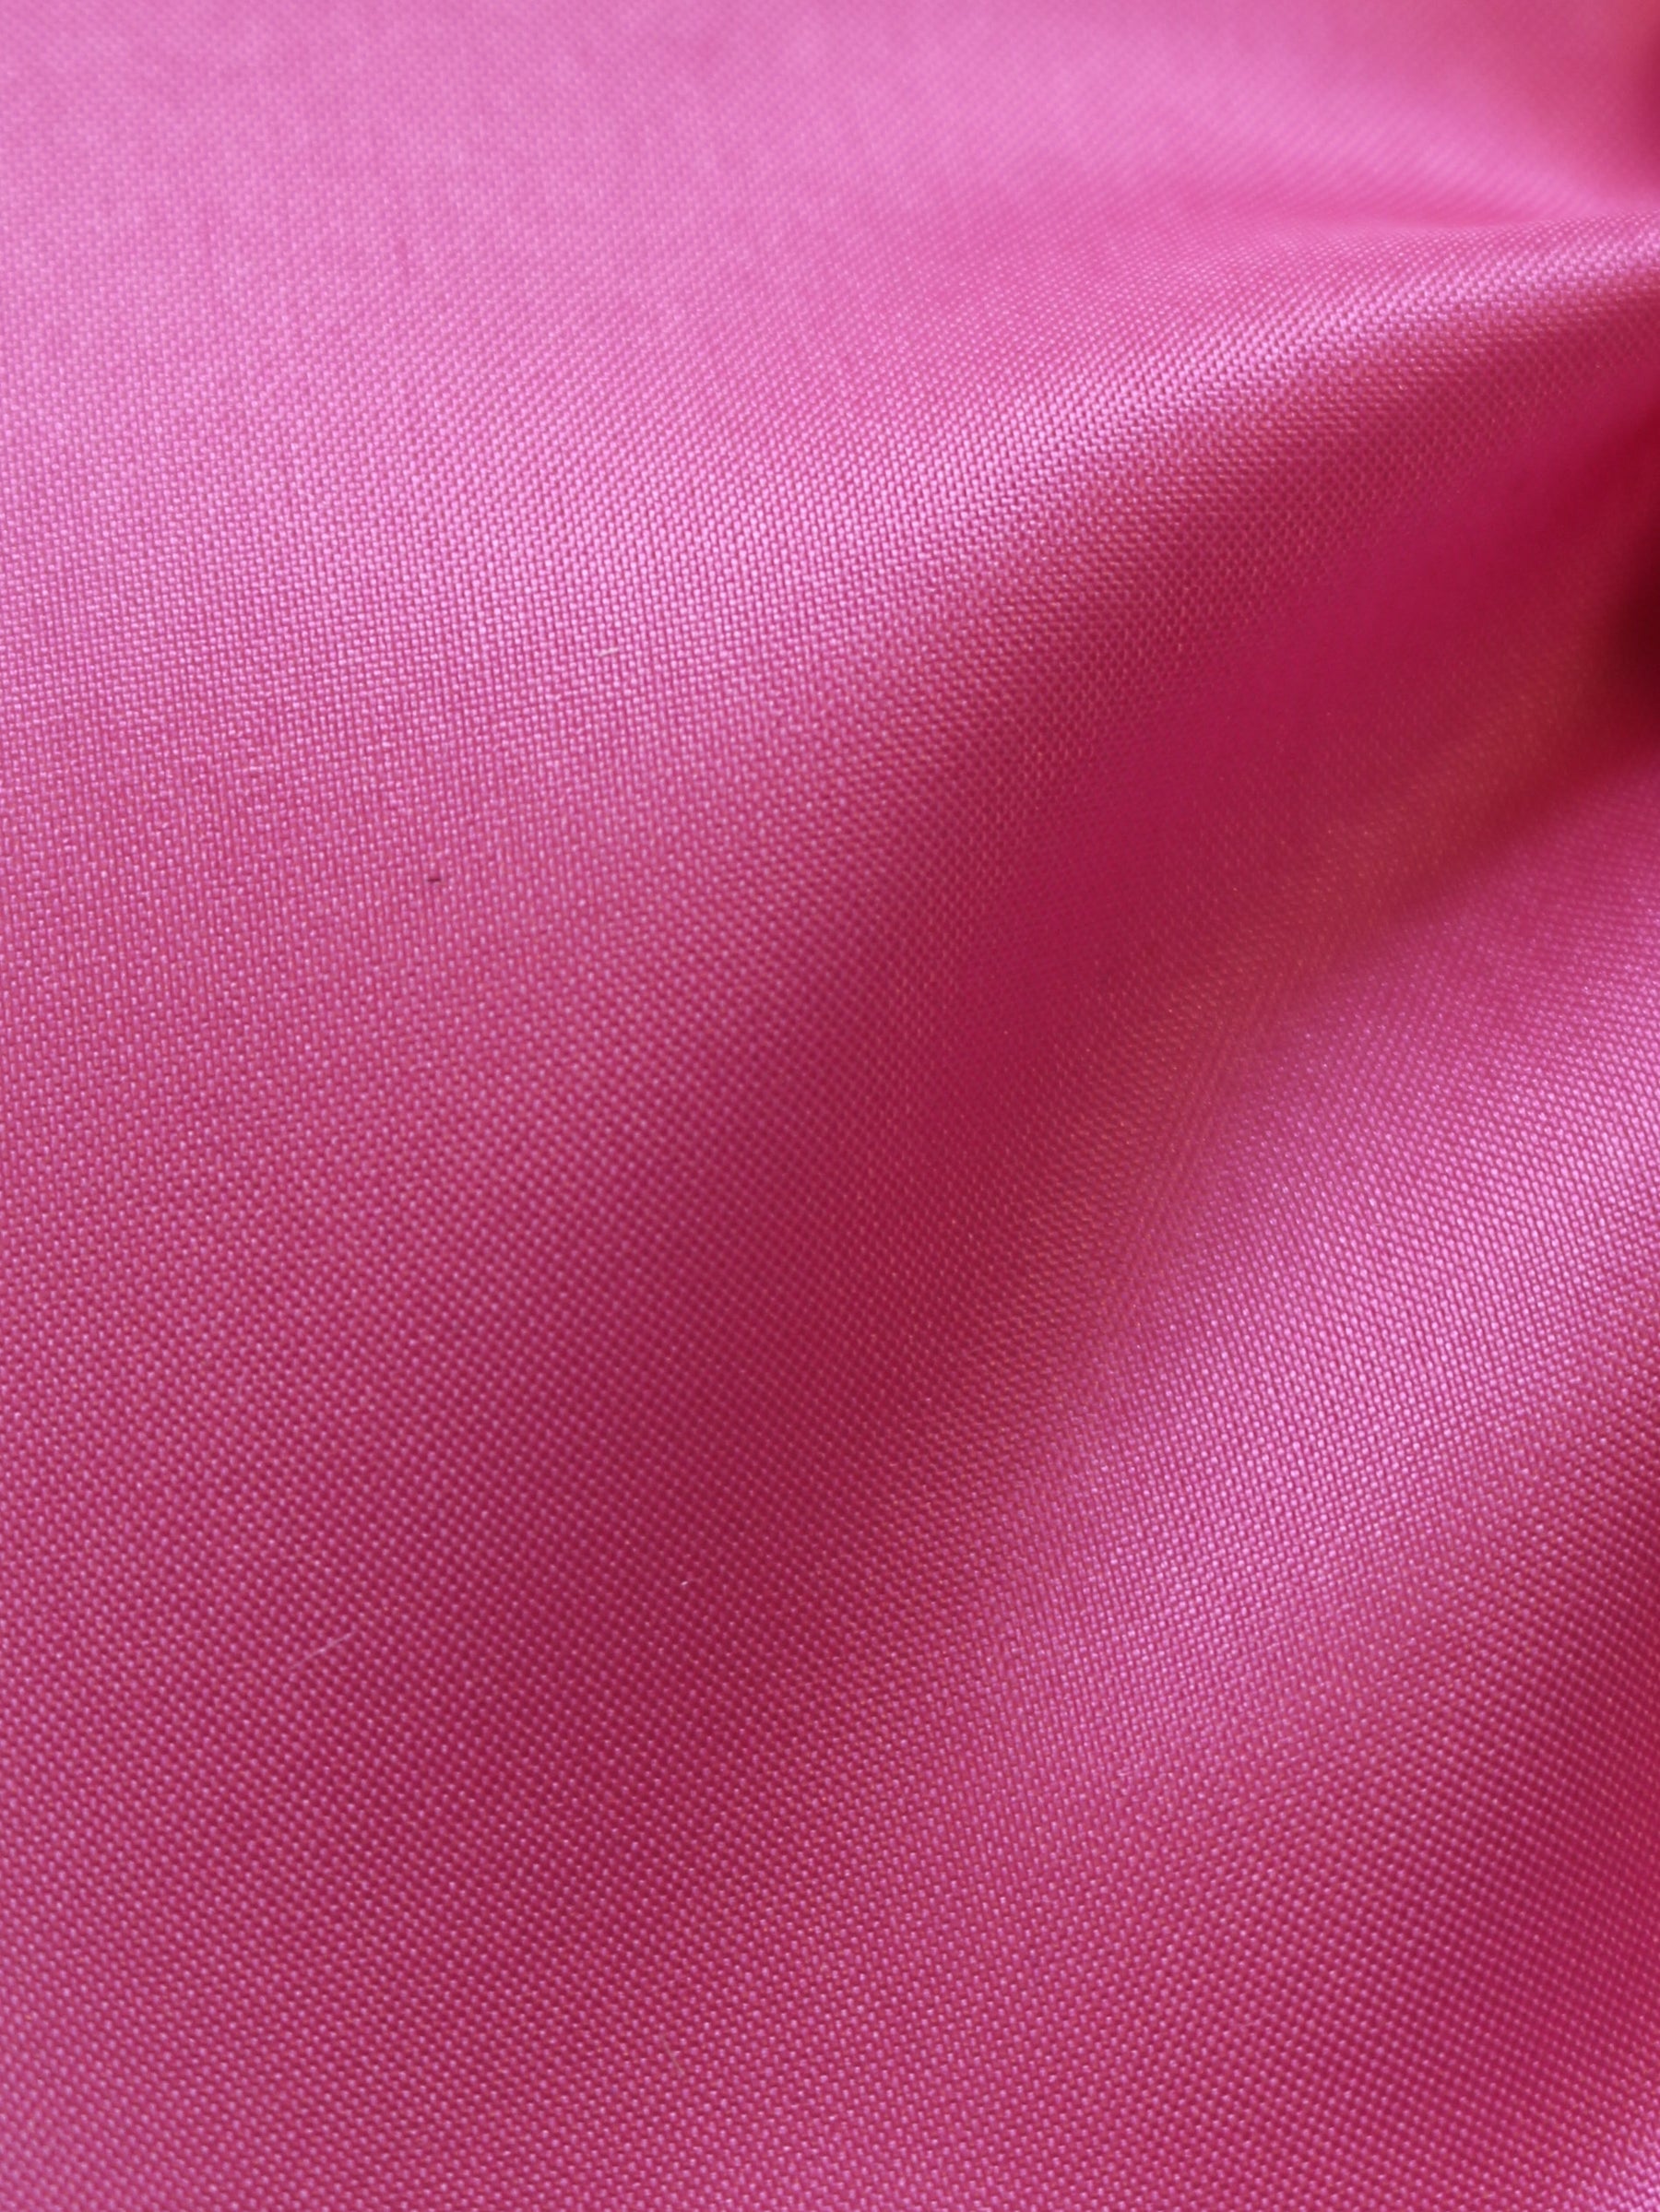 Hot Pink Rayon Lining (137cm wide)